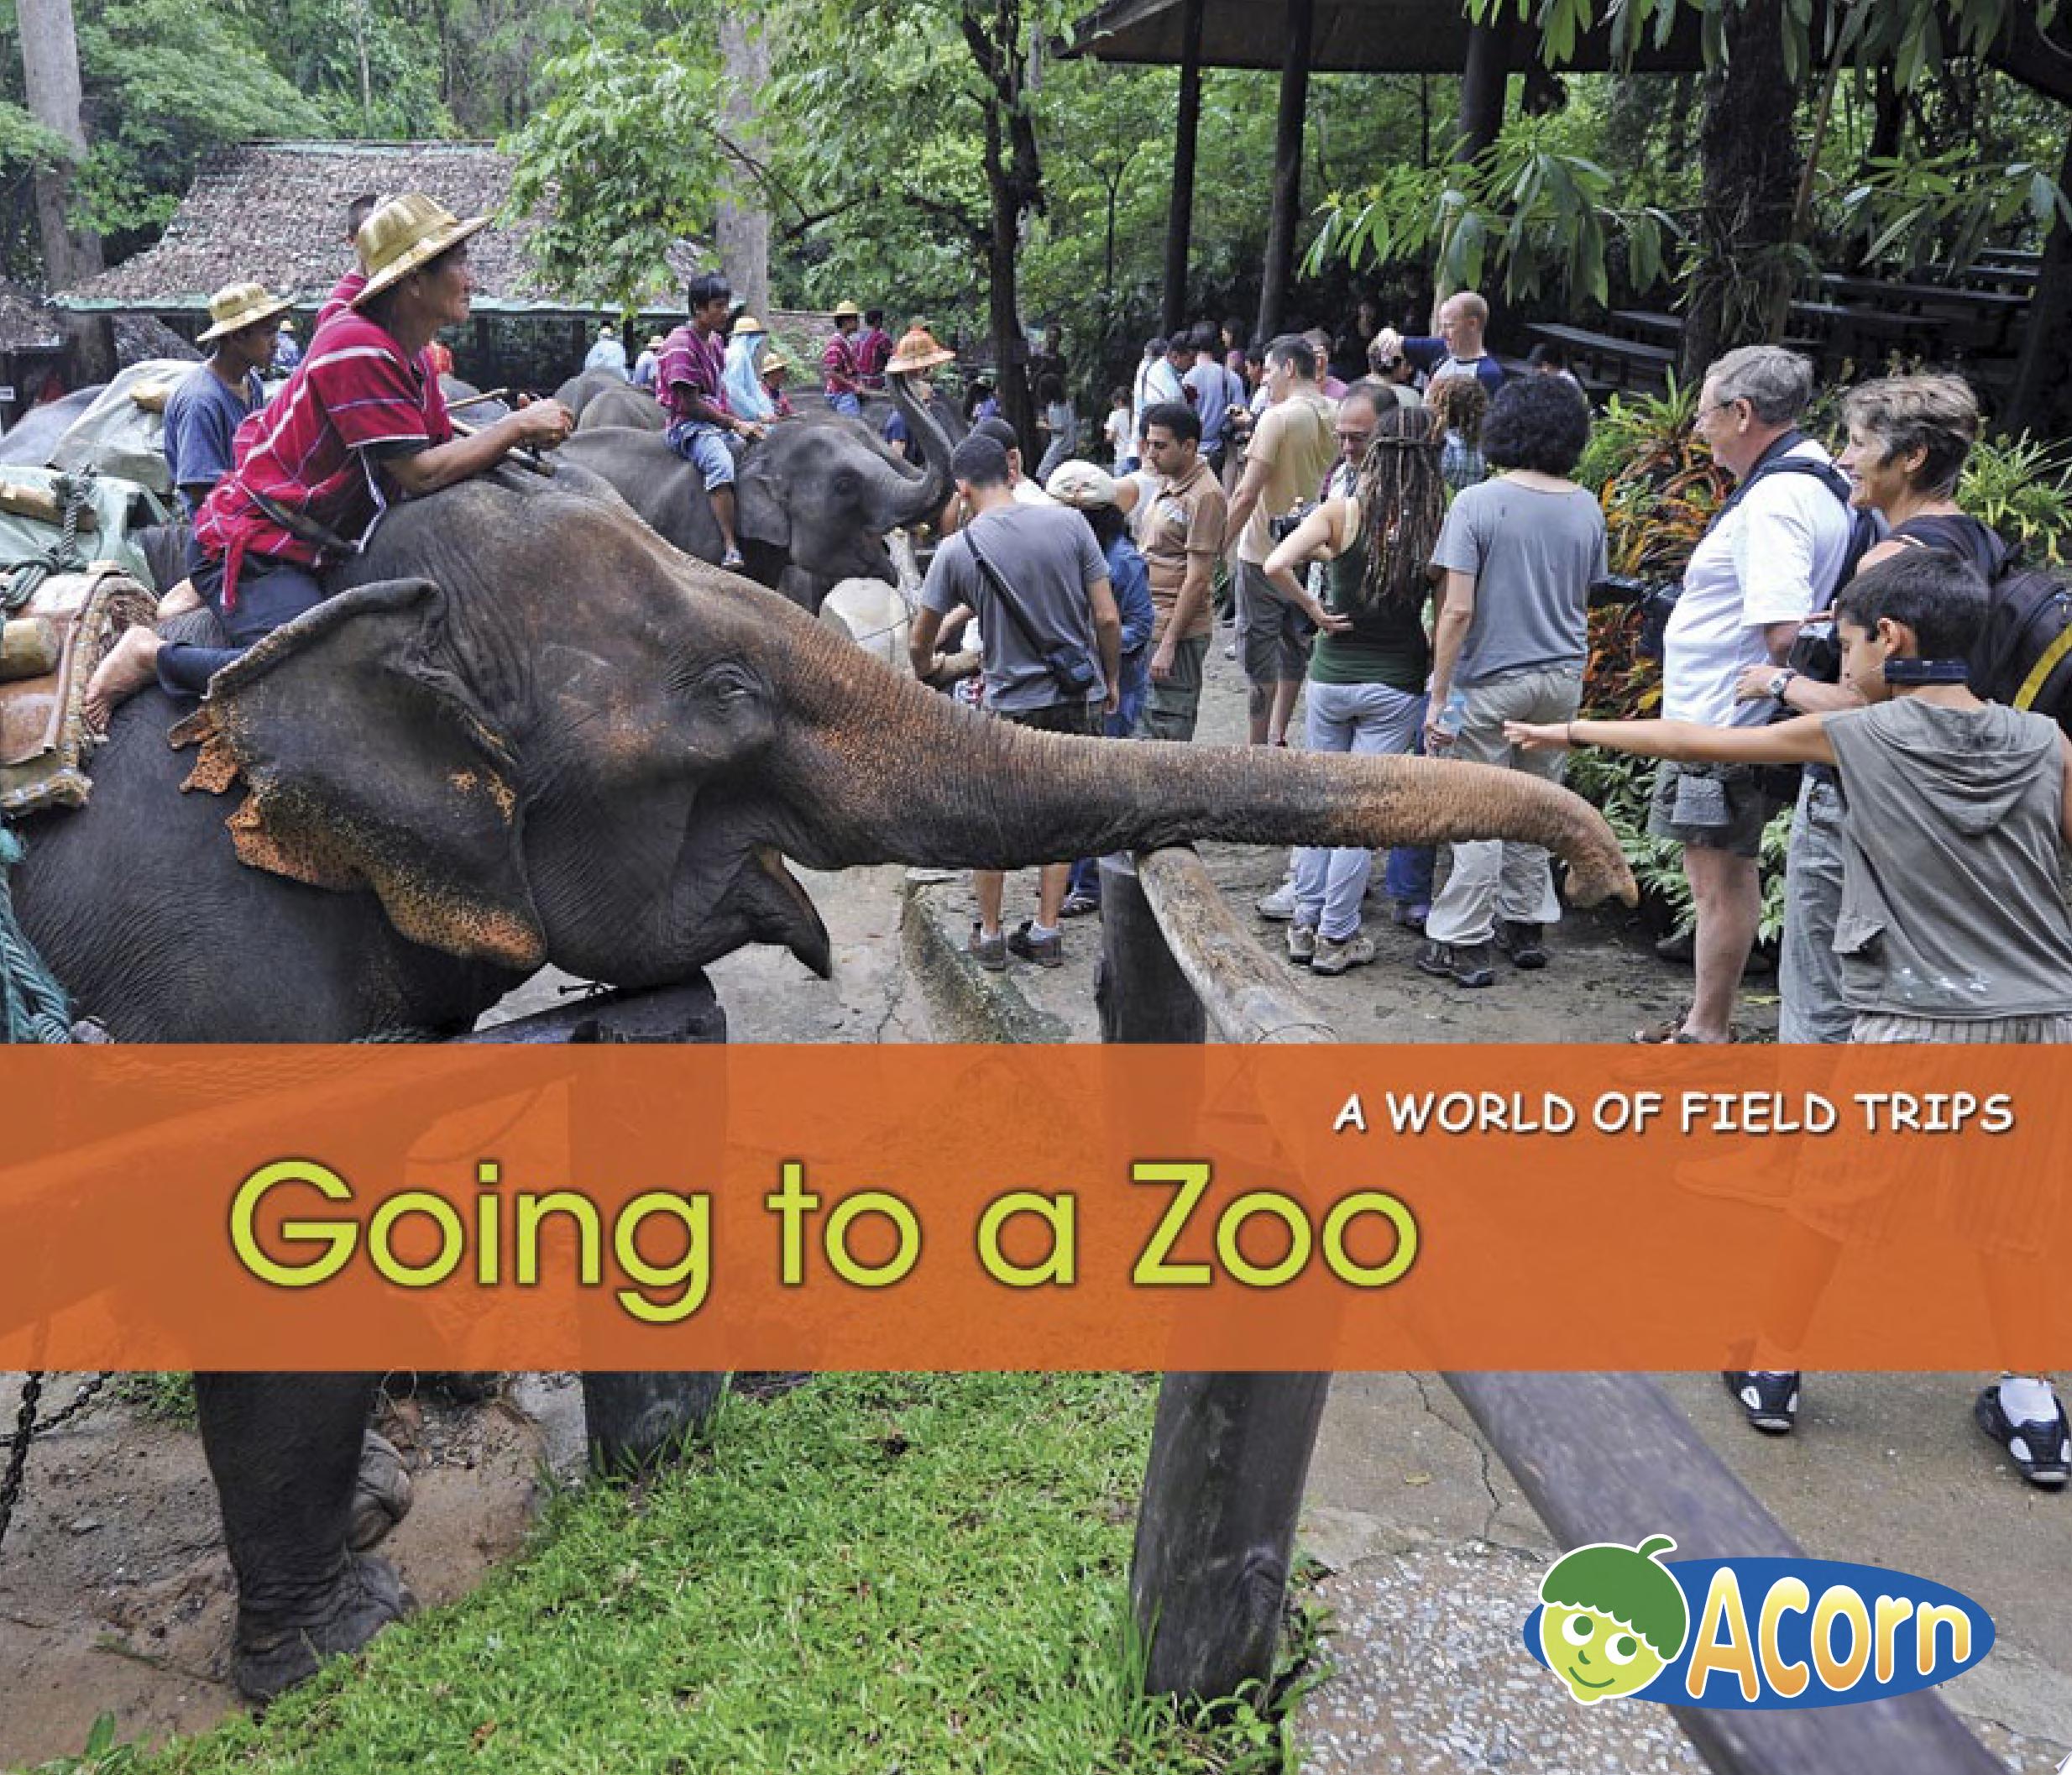 Image for "Going to a Zoo"